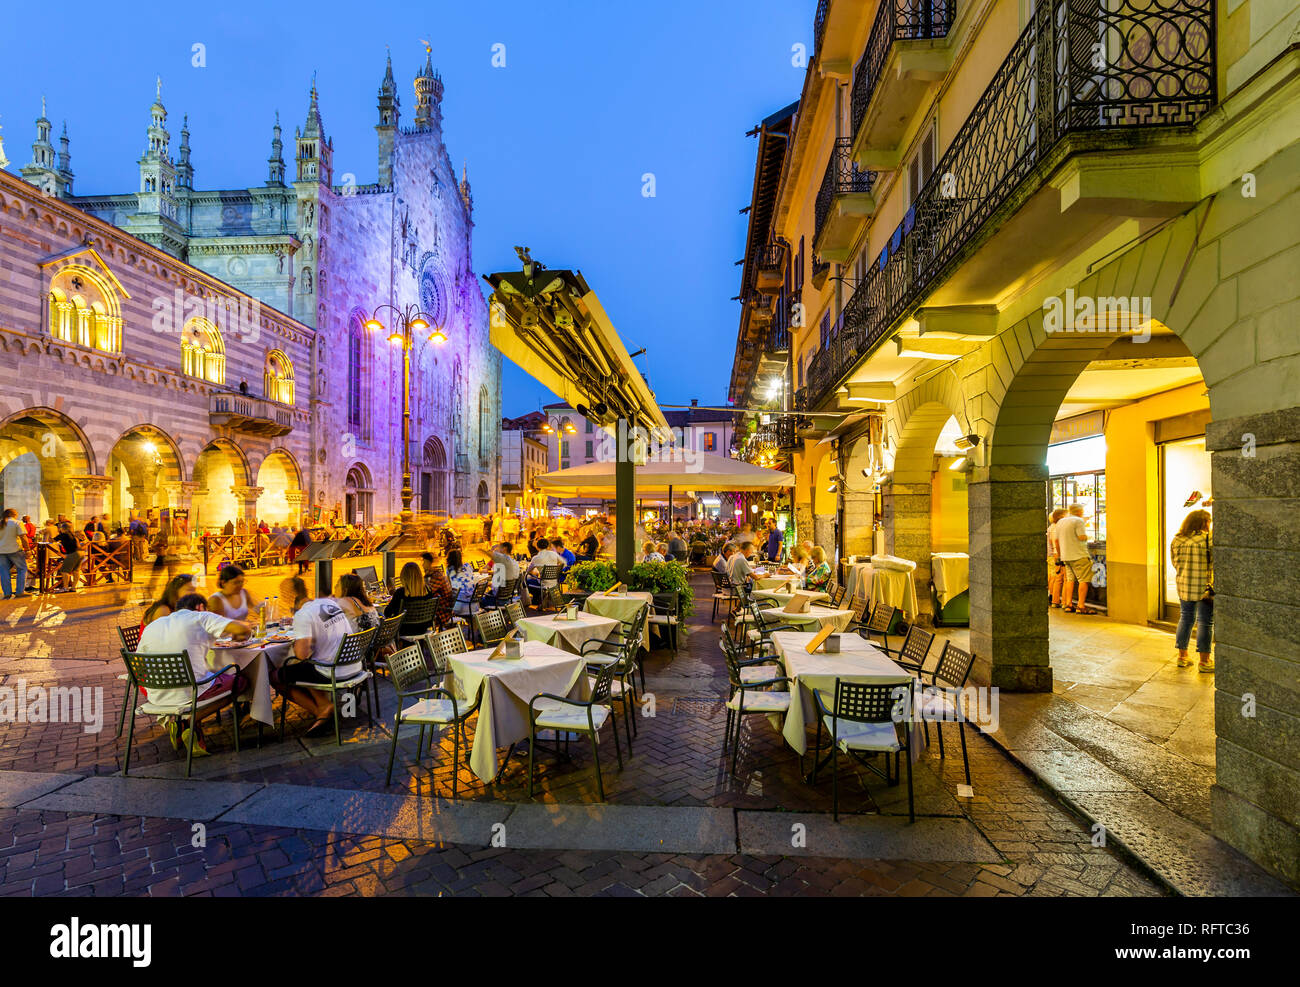 View of Duomo and restaurants in Piazza del Duomo at dusk, Como, Province of Como, Lake Como, Lombardy, Italy, Europe Stock Photo